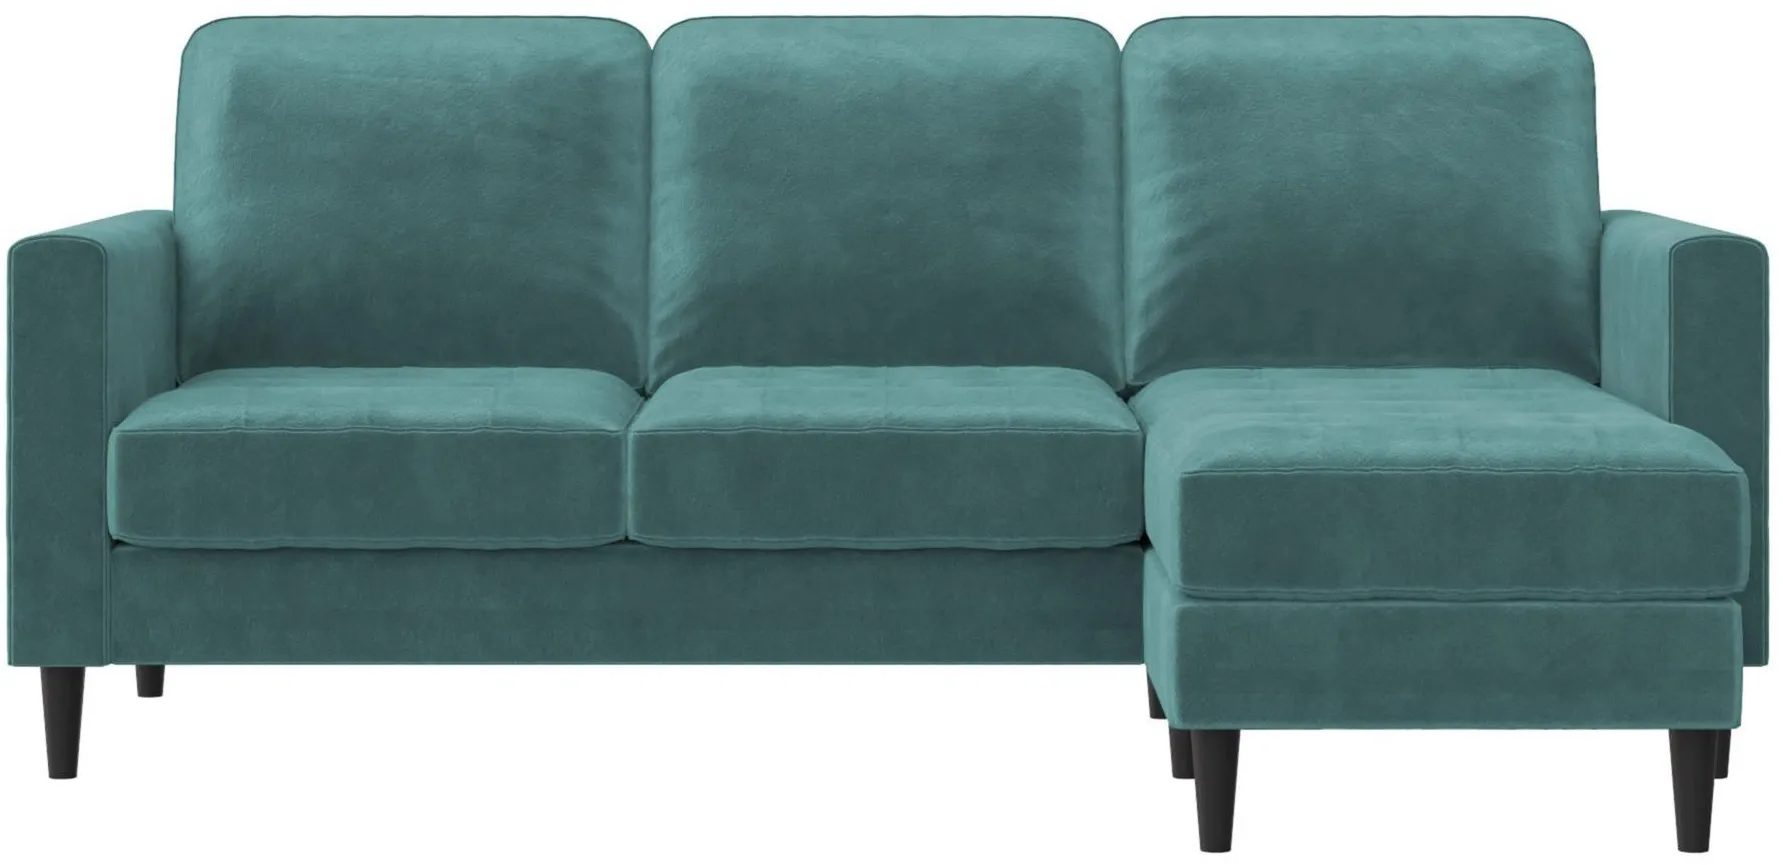 Strummer Reversible Sectional Sofa in Light Green by DOREL HOME FURNISHINGS